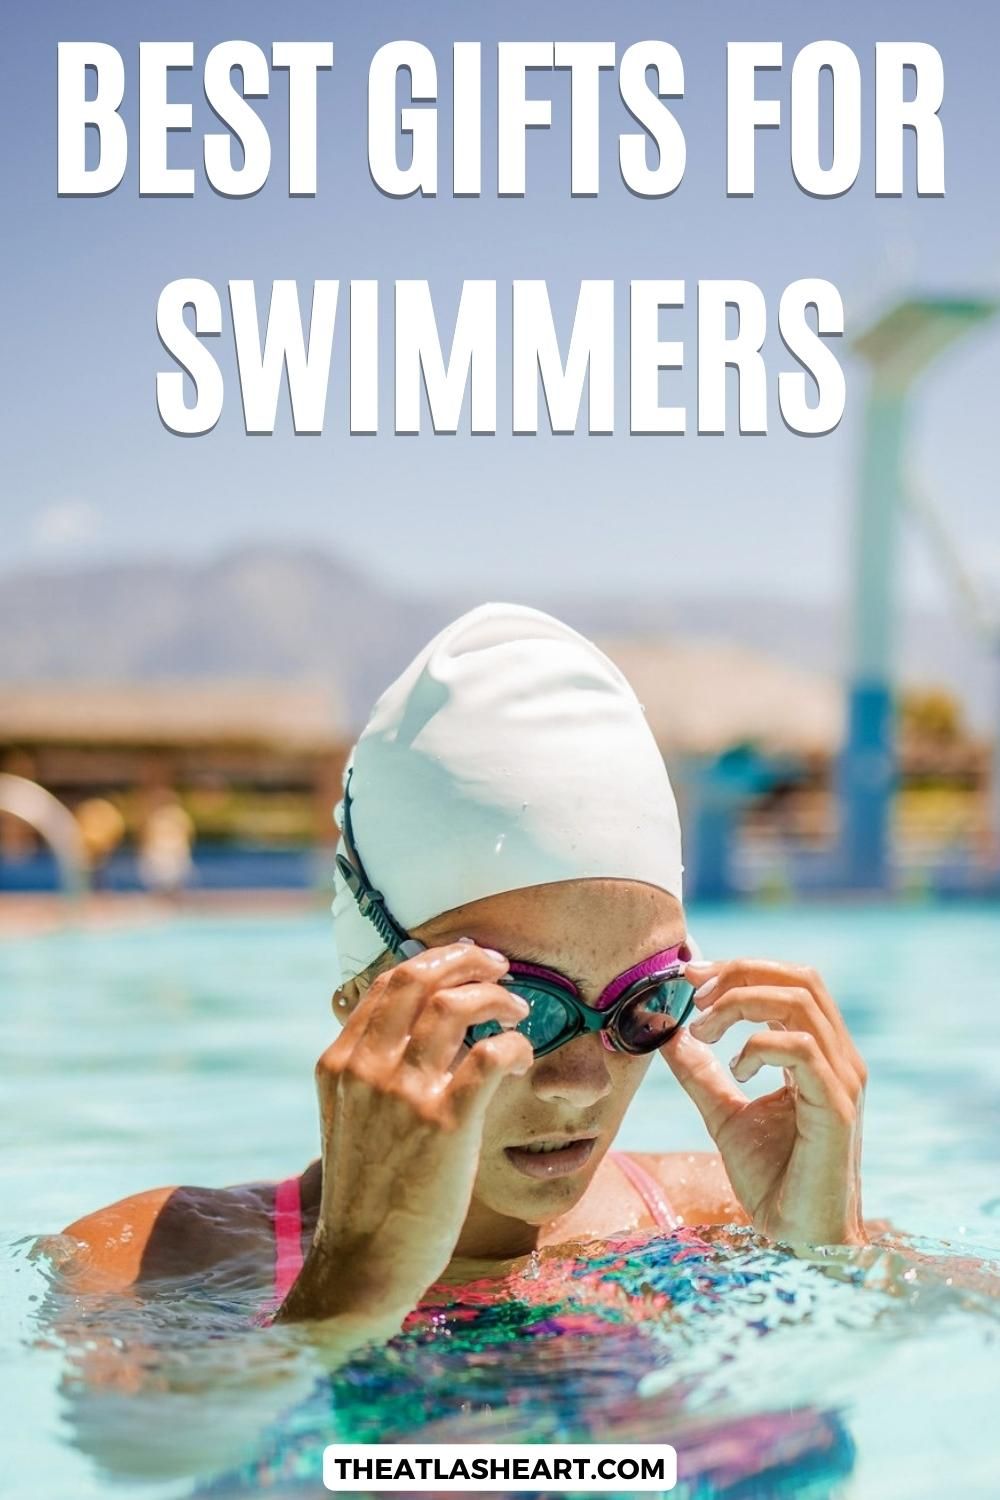 A young female swimmer in a white swimcap pokes here head out of the pool to adjust her goggles on a sunny day, with the background in soft focus, and the text overlay, "Best Gifts for Swimmers."